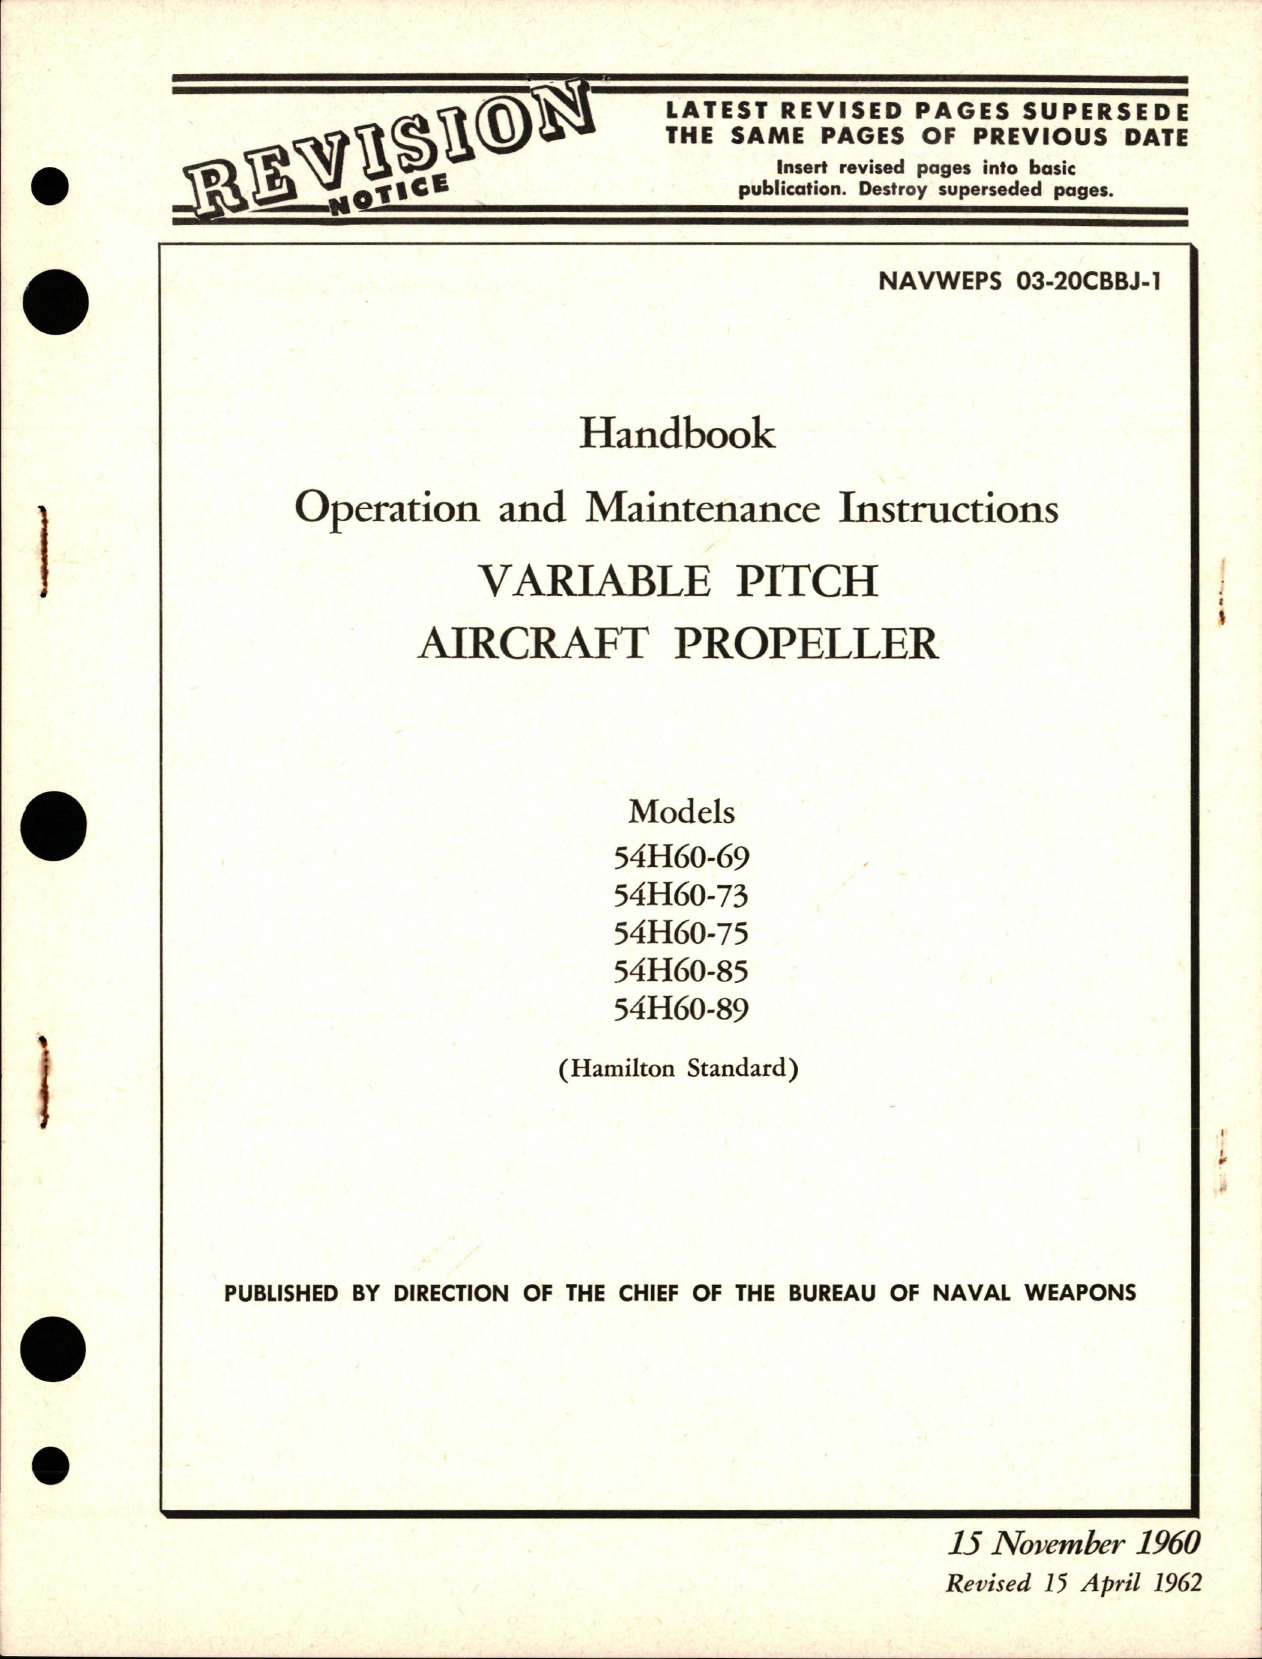 Sample page 1 from AirCorps Library document: Operation and Maintenance Instructions for Variable Pitch Propeller - Models 54H60-69, 54H60-73, 54H60-75, 54H60-85, and 54H60-89